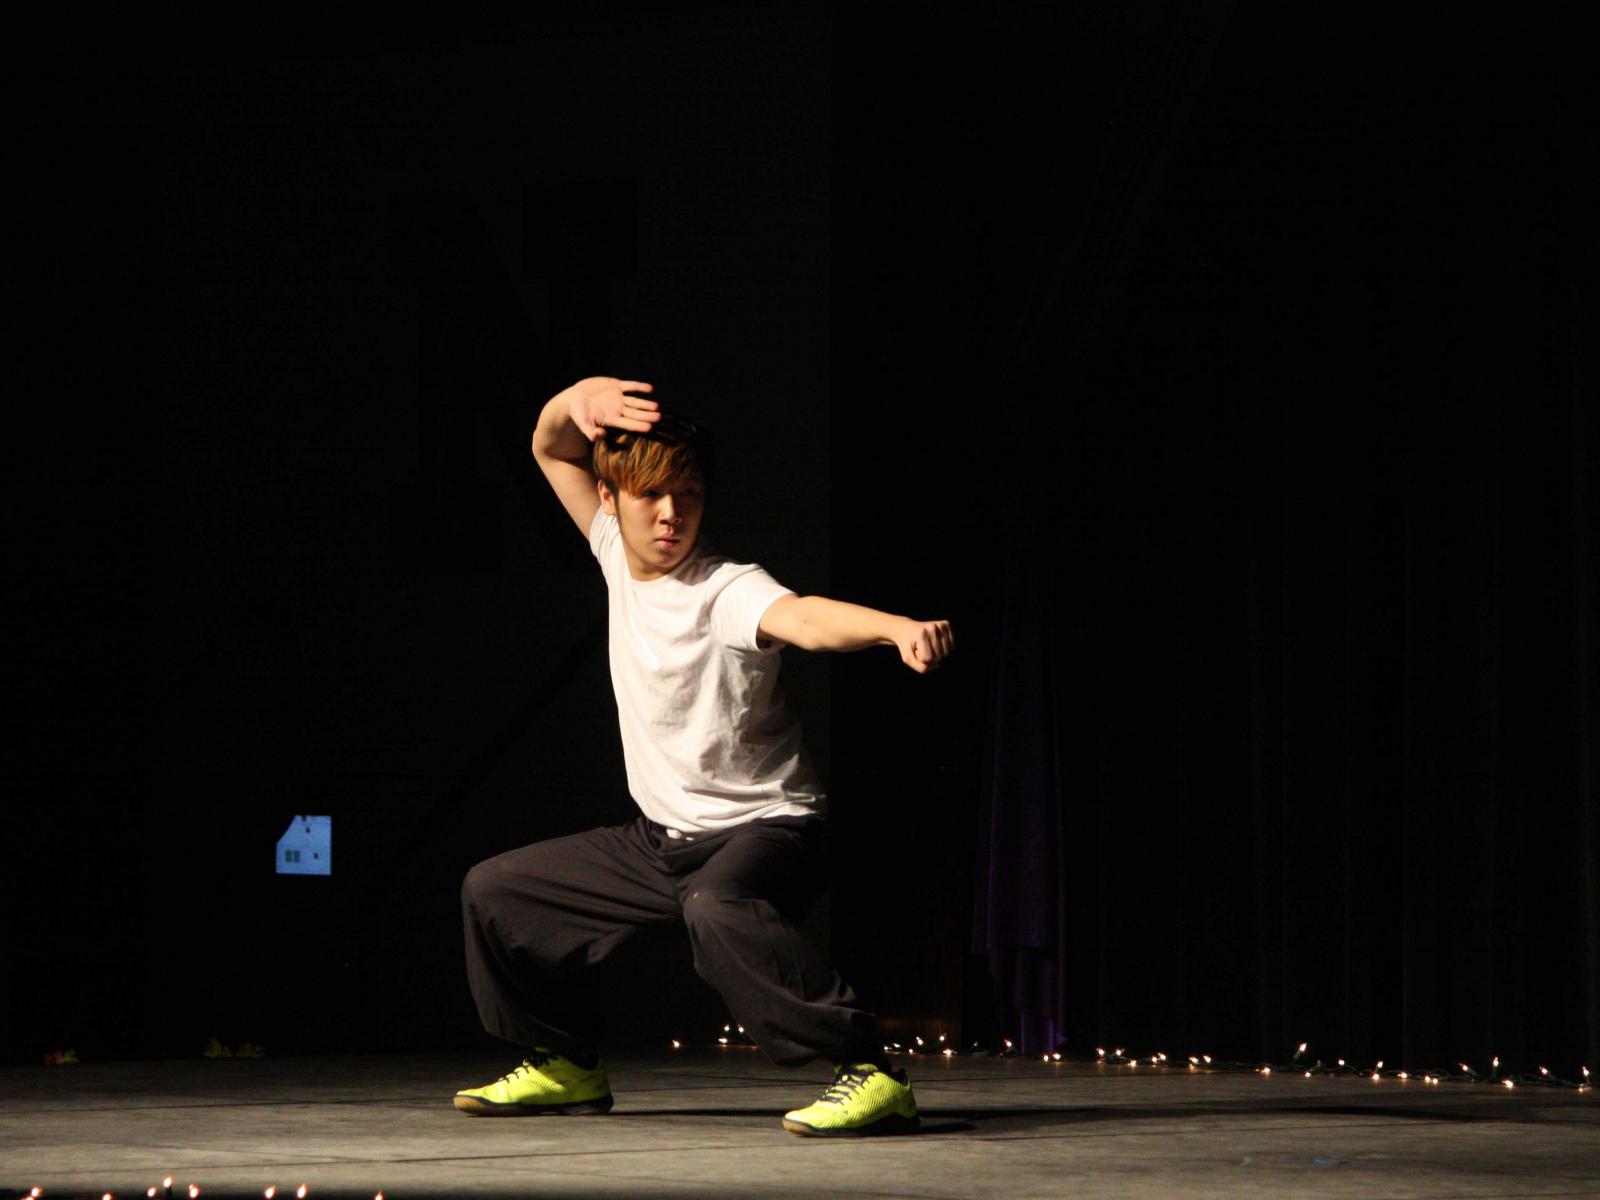 Chinese martial arts performed by Alvin Soo